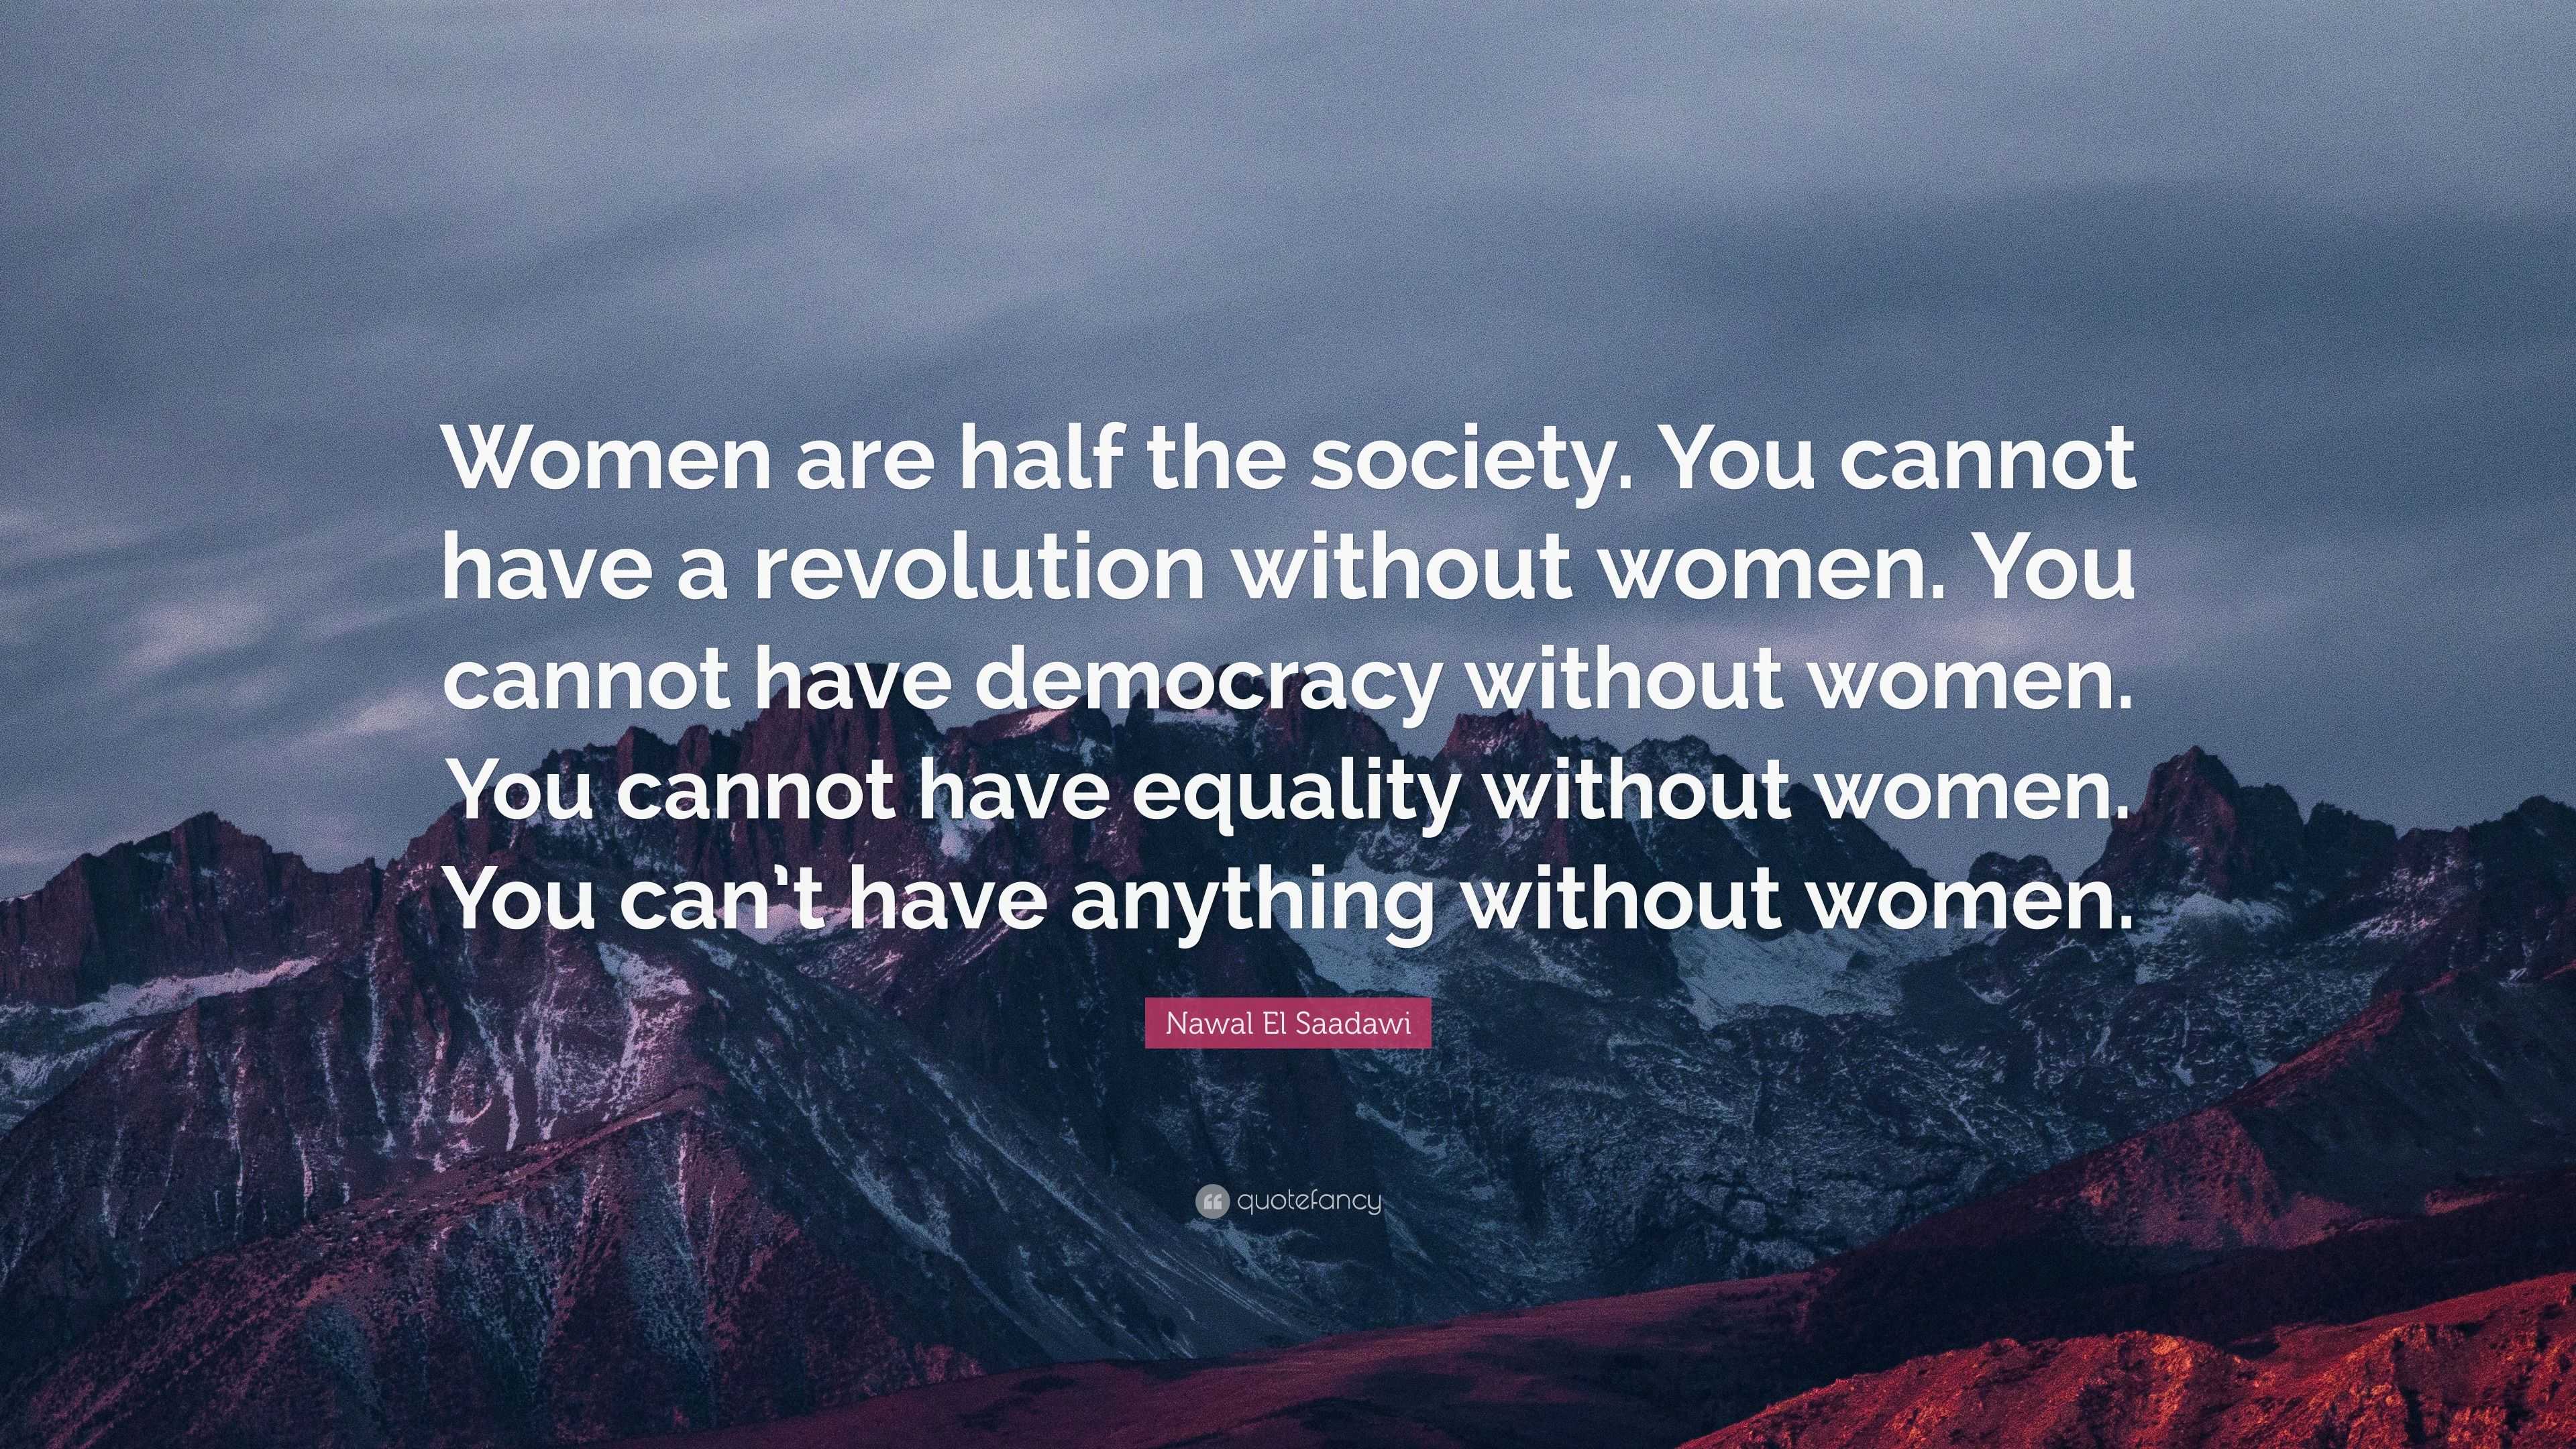 Nawal El Saadawi Quote: “Women are half the society. You cannot have a ...